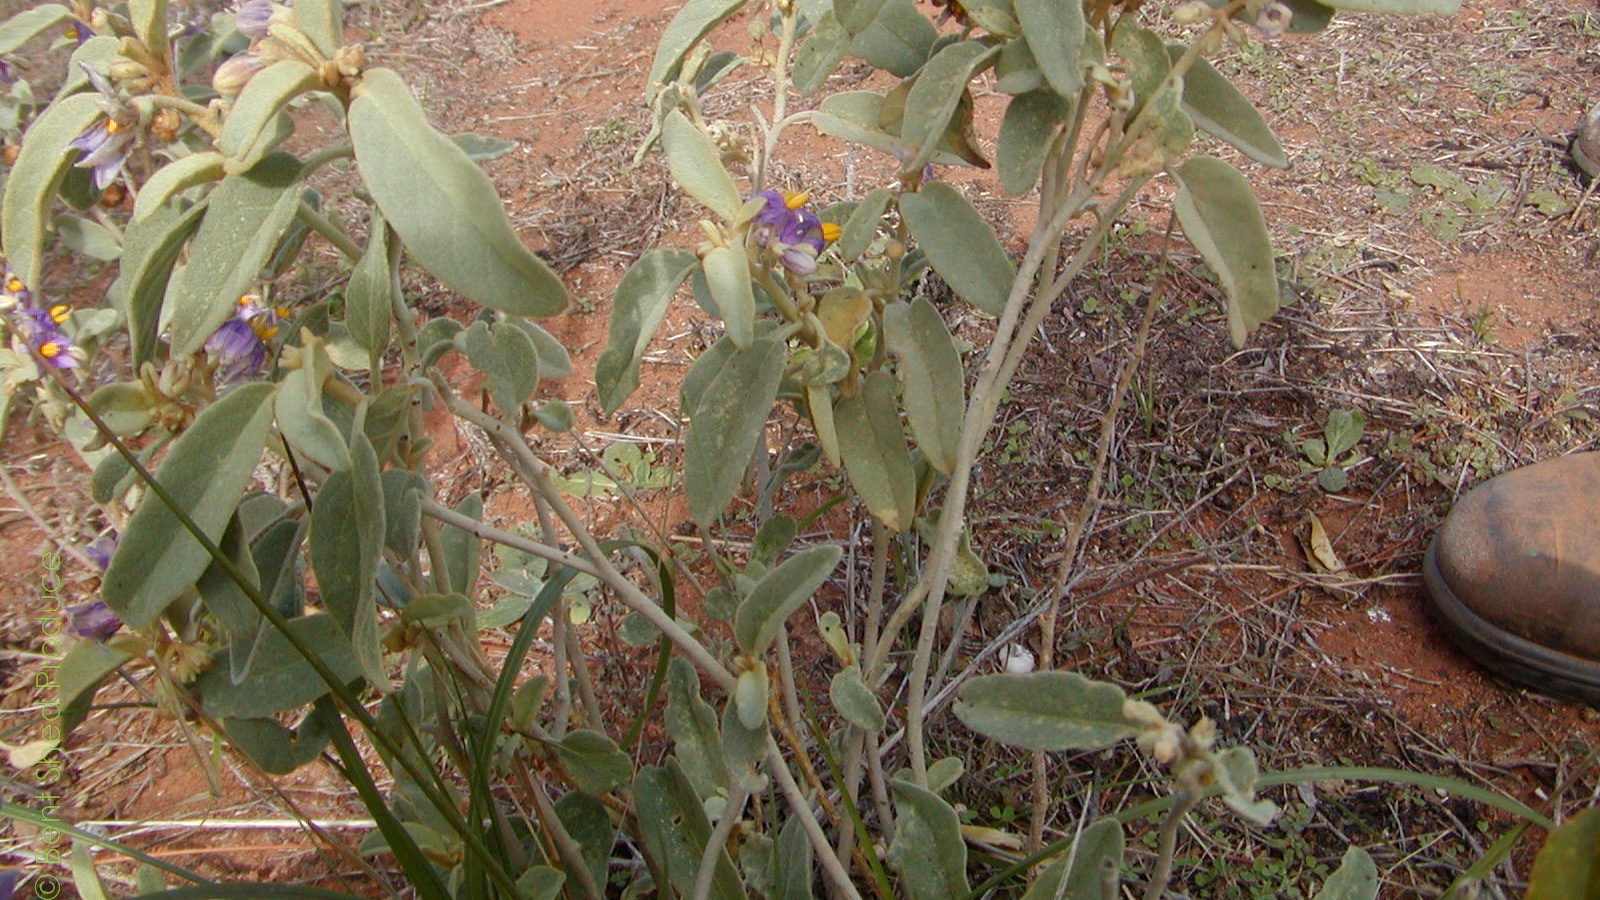 Red dirt forms the background to a small plant with silvery-grey leaves. It has distinct purple flowers with yellow stamens. There's the foot of a brown boot to the right of the image.